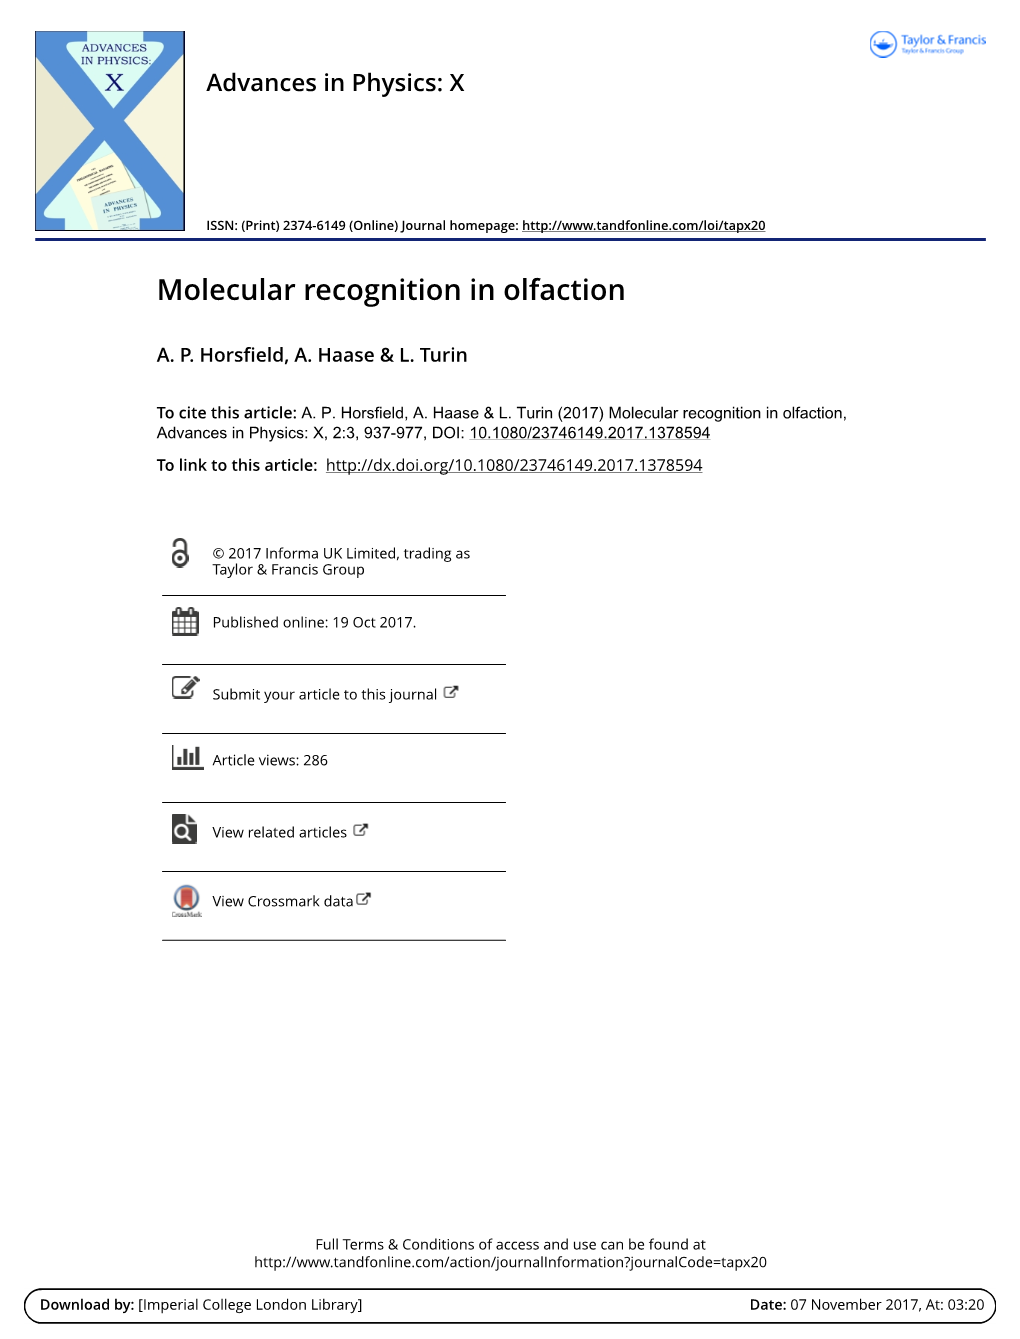 Molecular Recognition in Olfaction